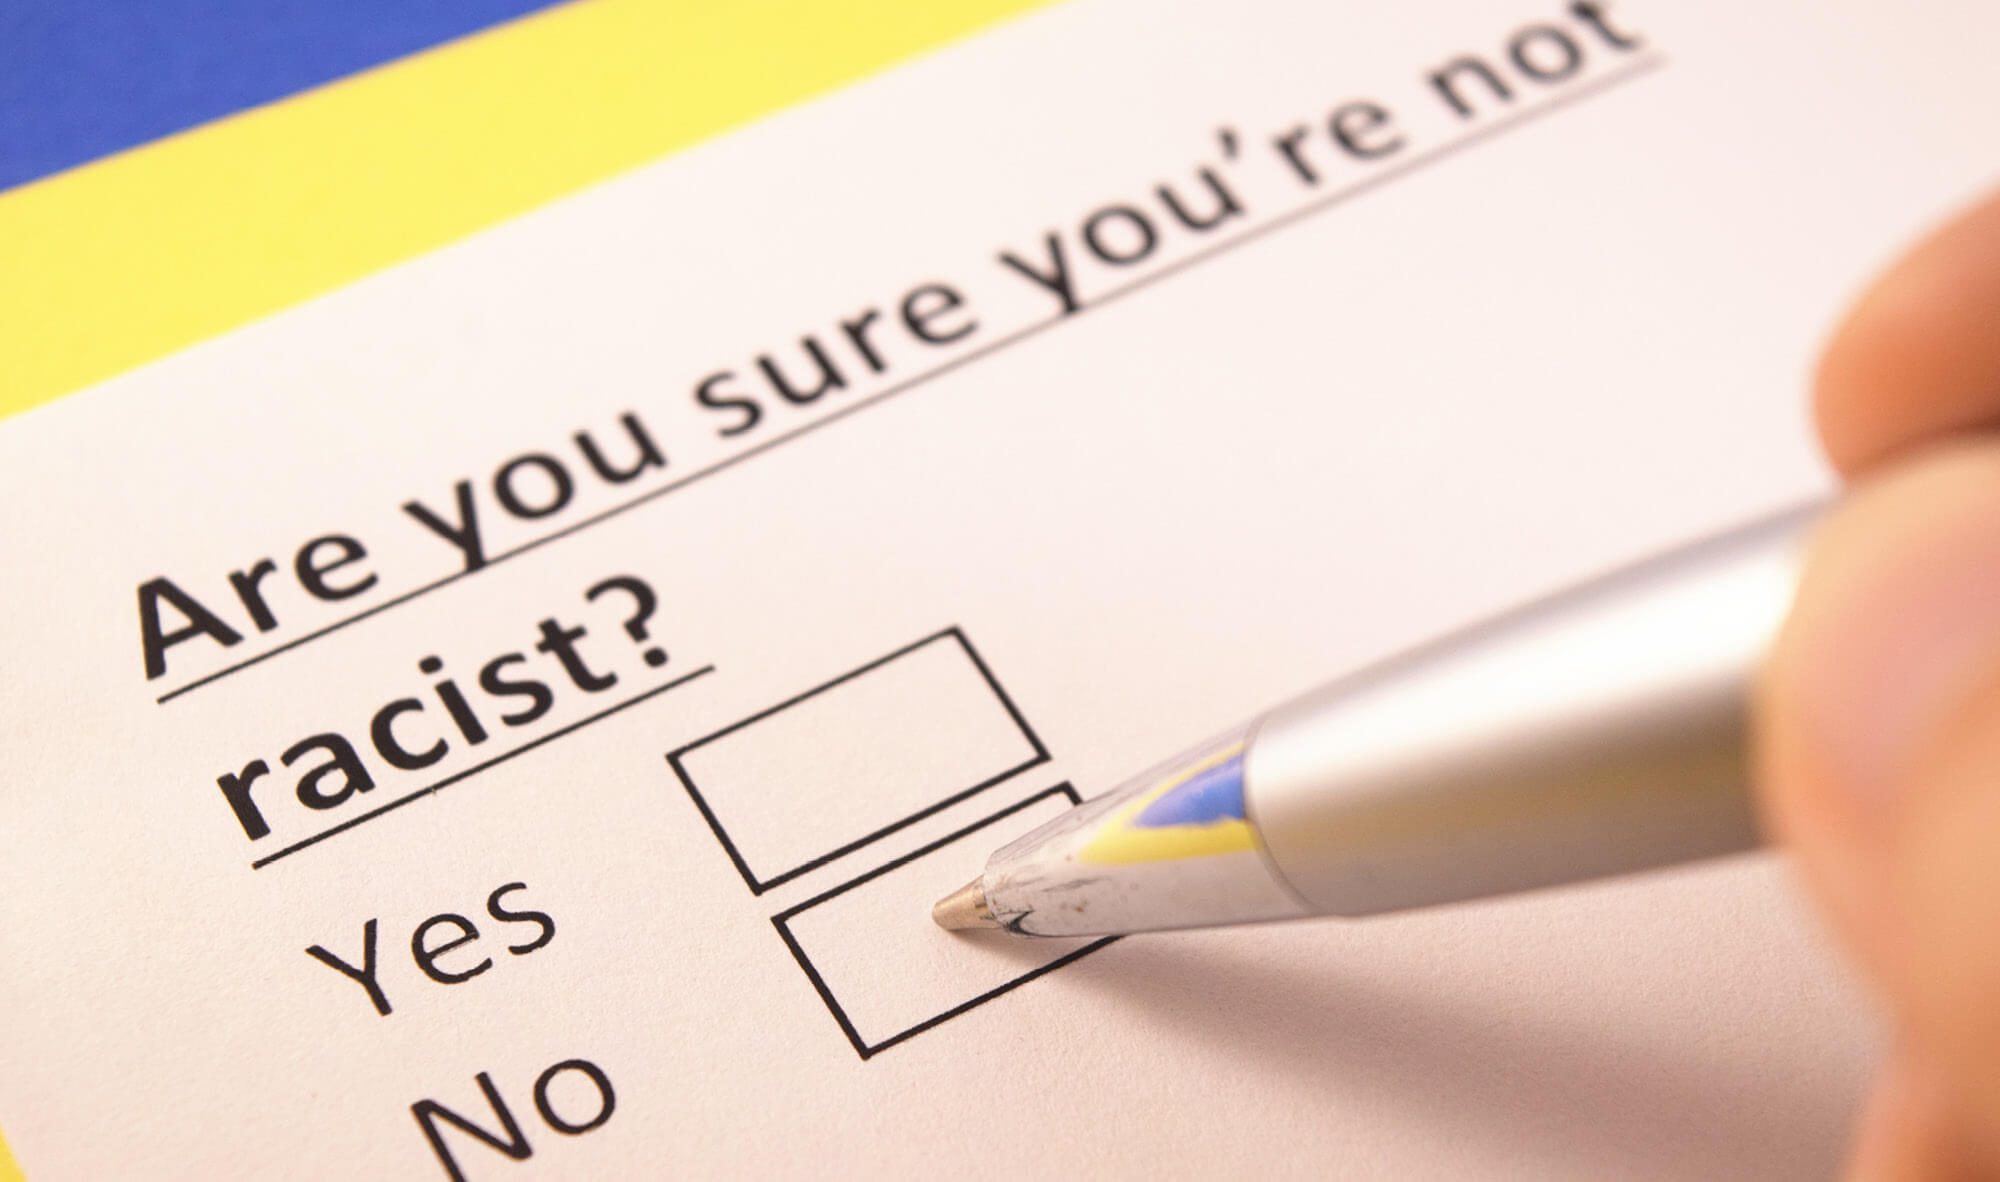 Survey with the question: Are you sure you're not racist? and yes/no boxes. A pen is poised to select "no."